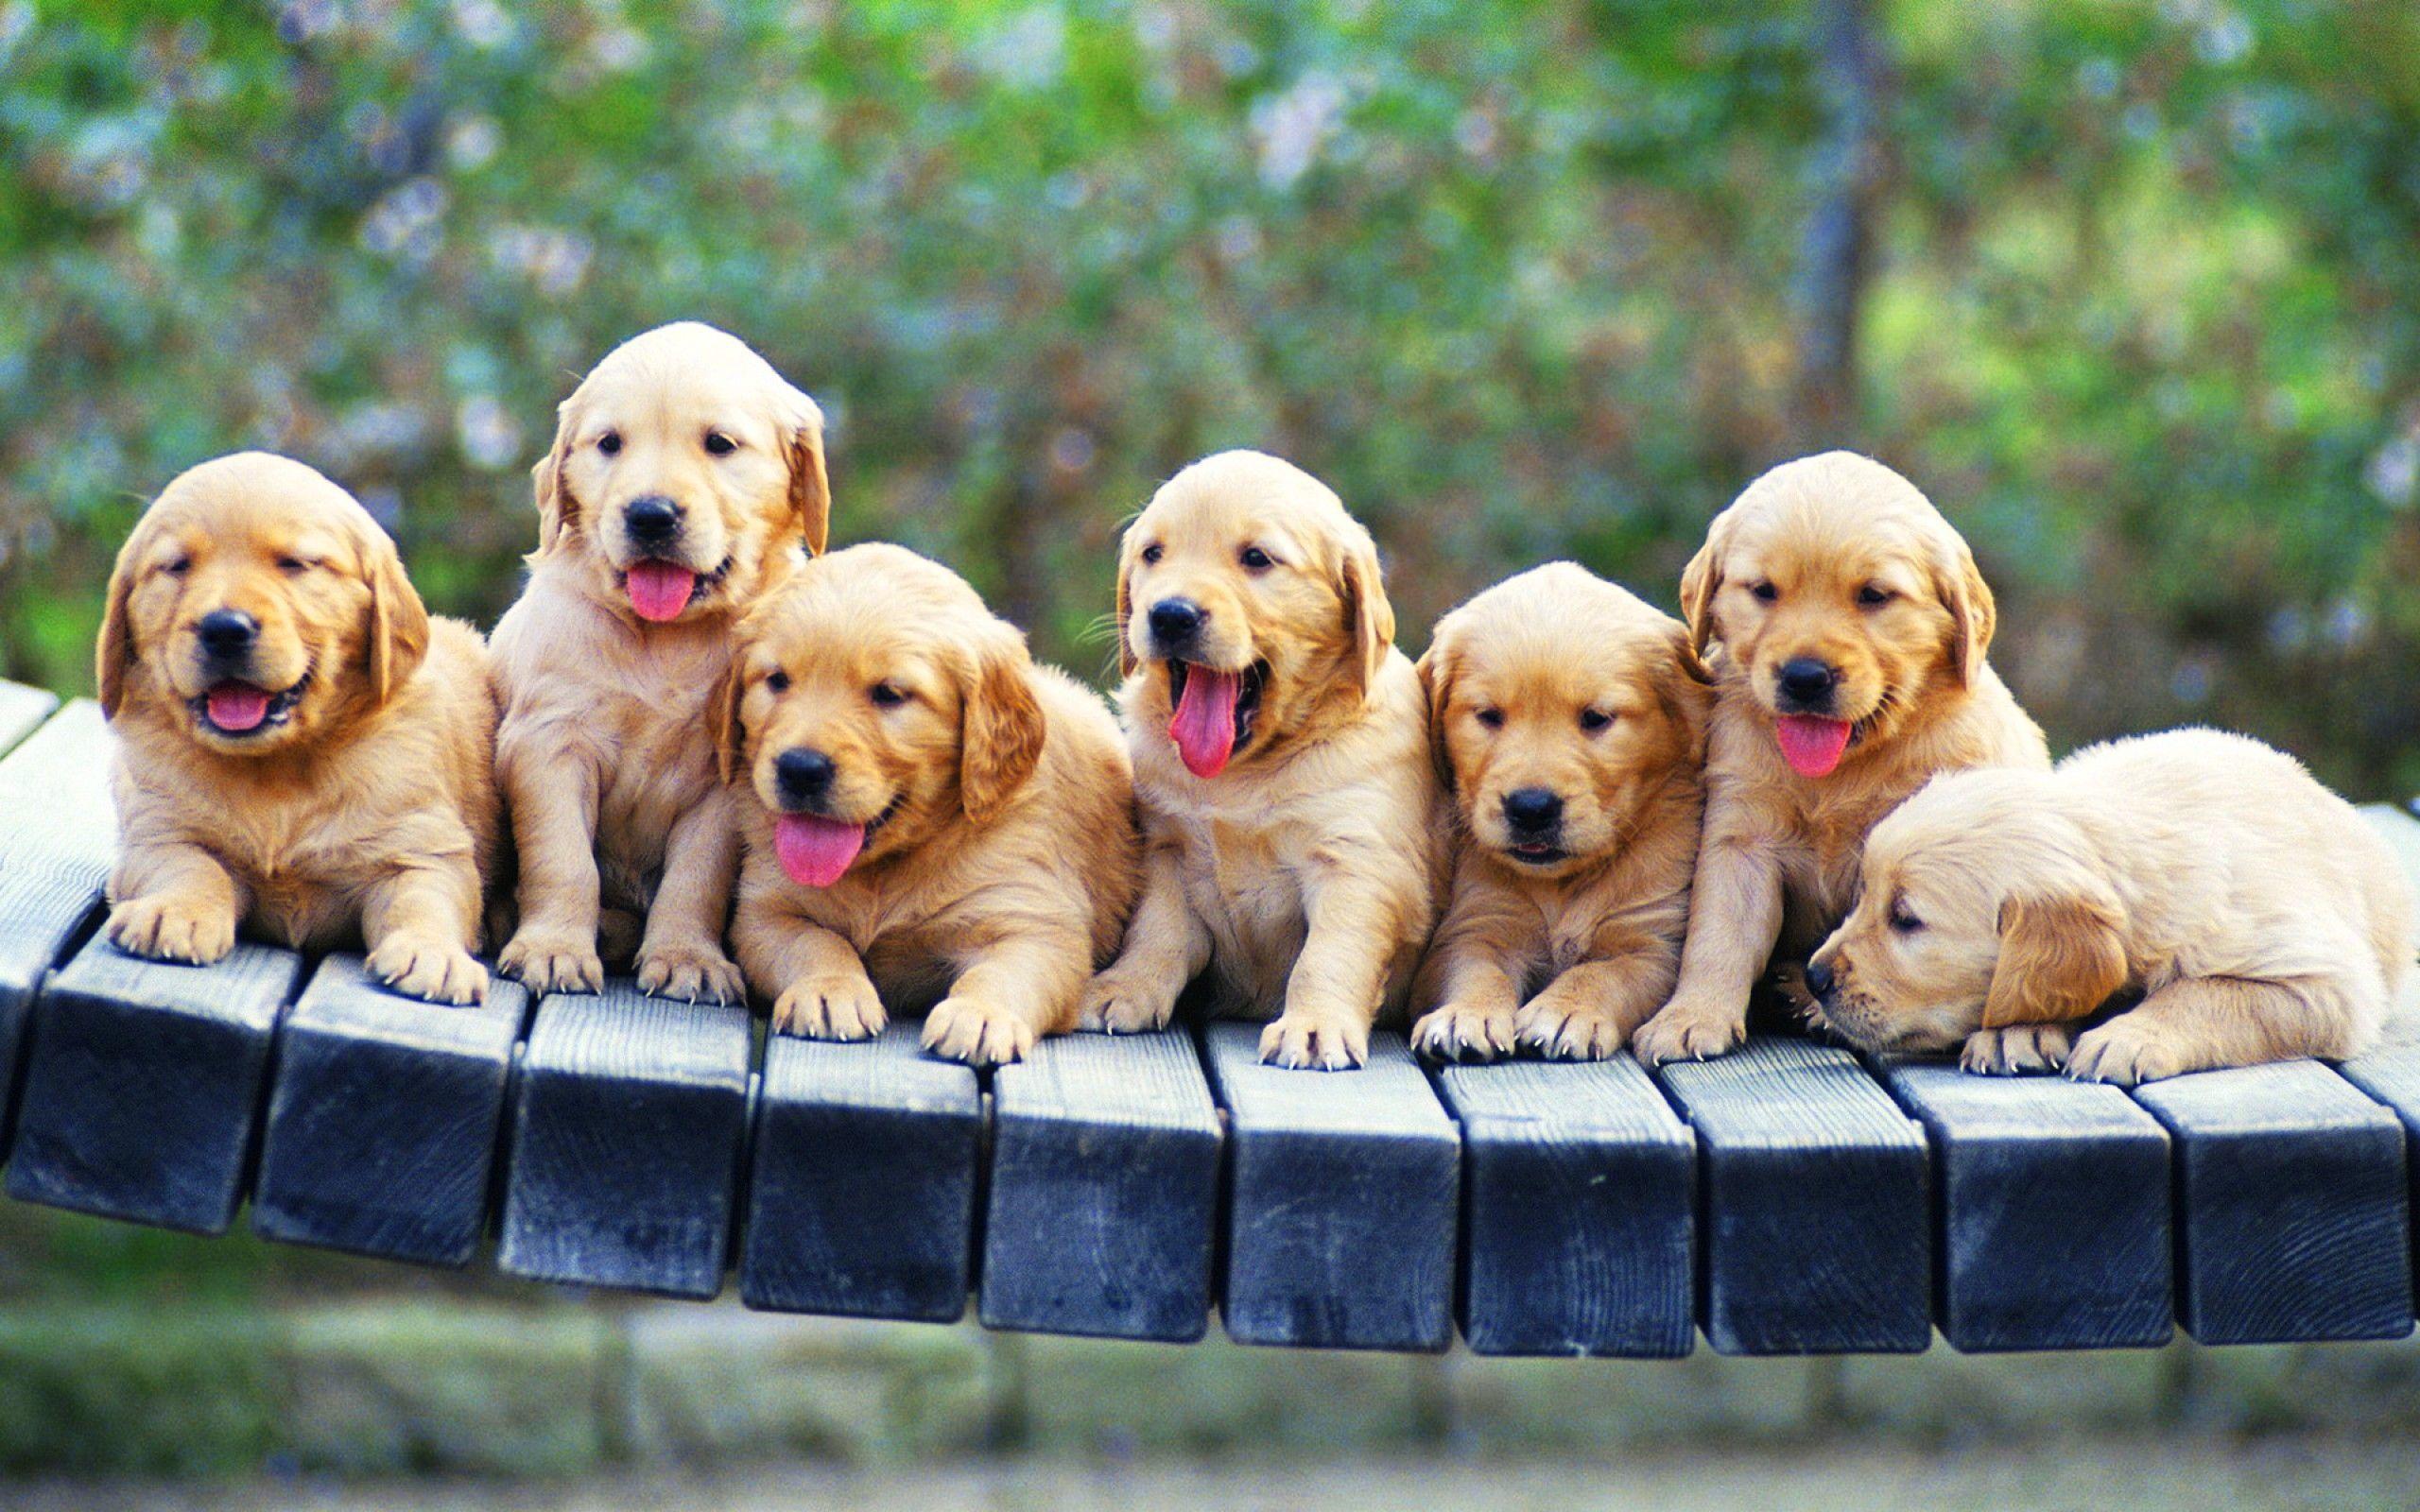 Very Cute Puppy Wallpapers on WallpaperDog